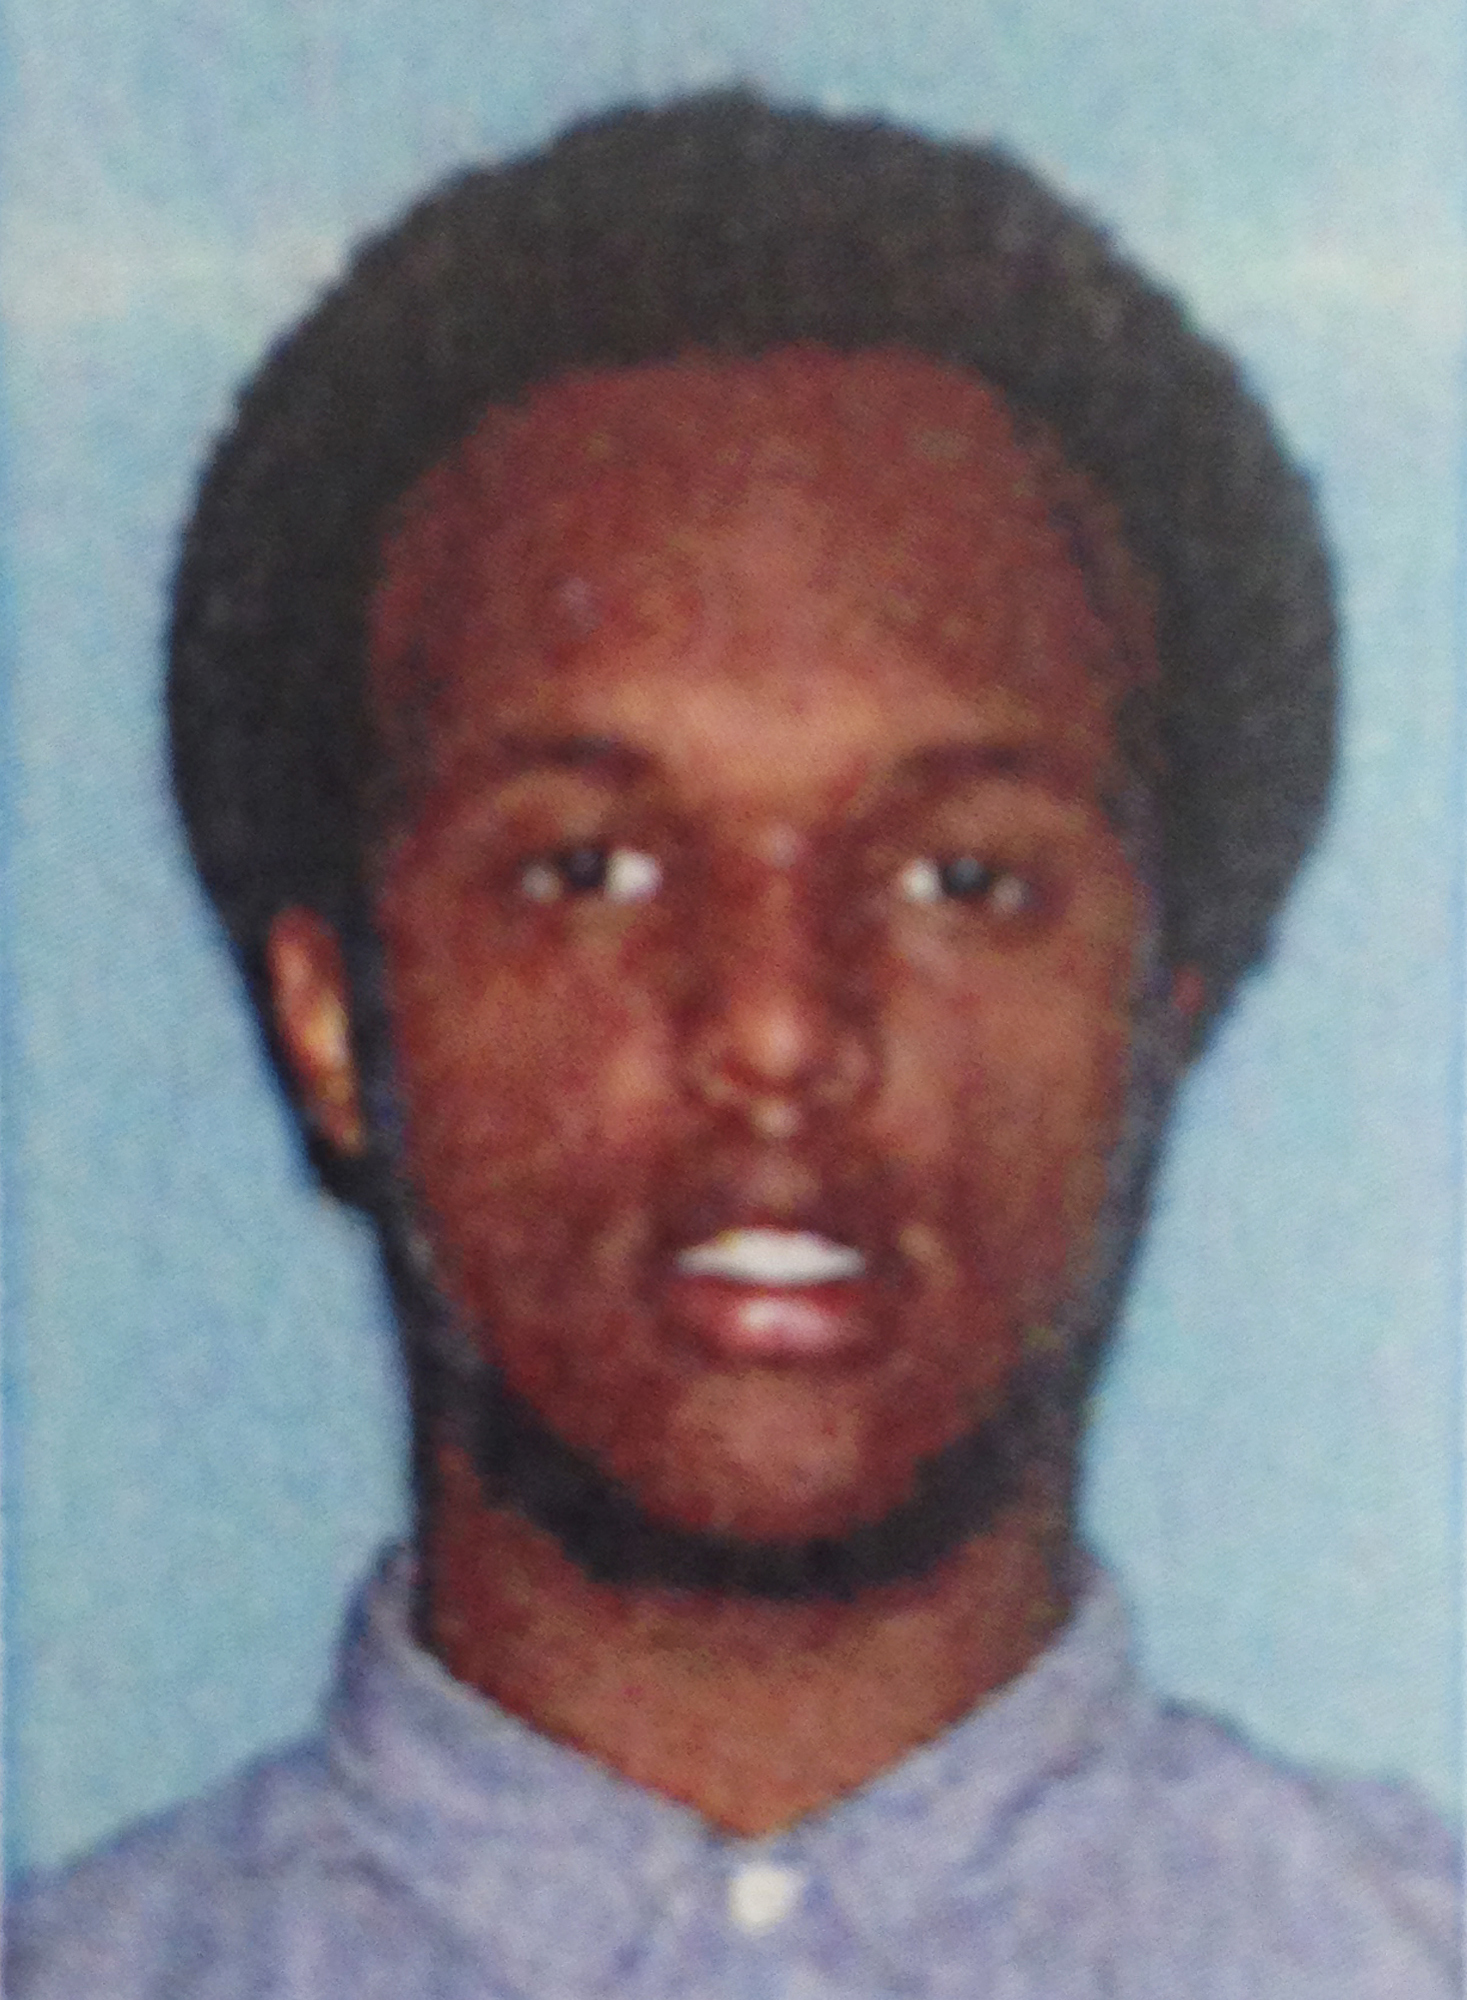 This undated file photo provided by the U.S. Attorney's Office shows Mohamed Roble, a survivor of the 2007 Minneapolis bridge collapse. Roble was charged Aug. 24, 2016, with providing and conspiring to provide material support to a foreign terrorist organization. (U.S. Attorney's Office—AP)